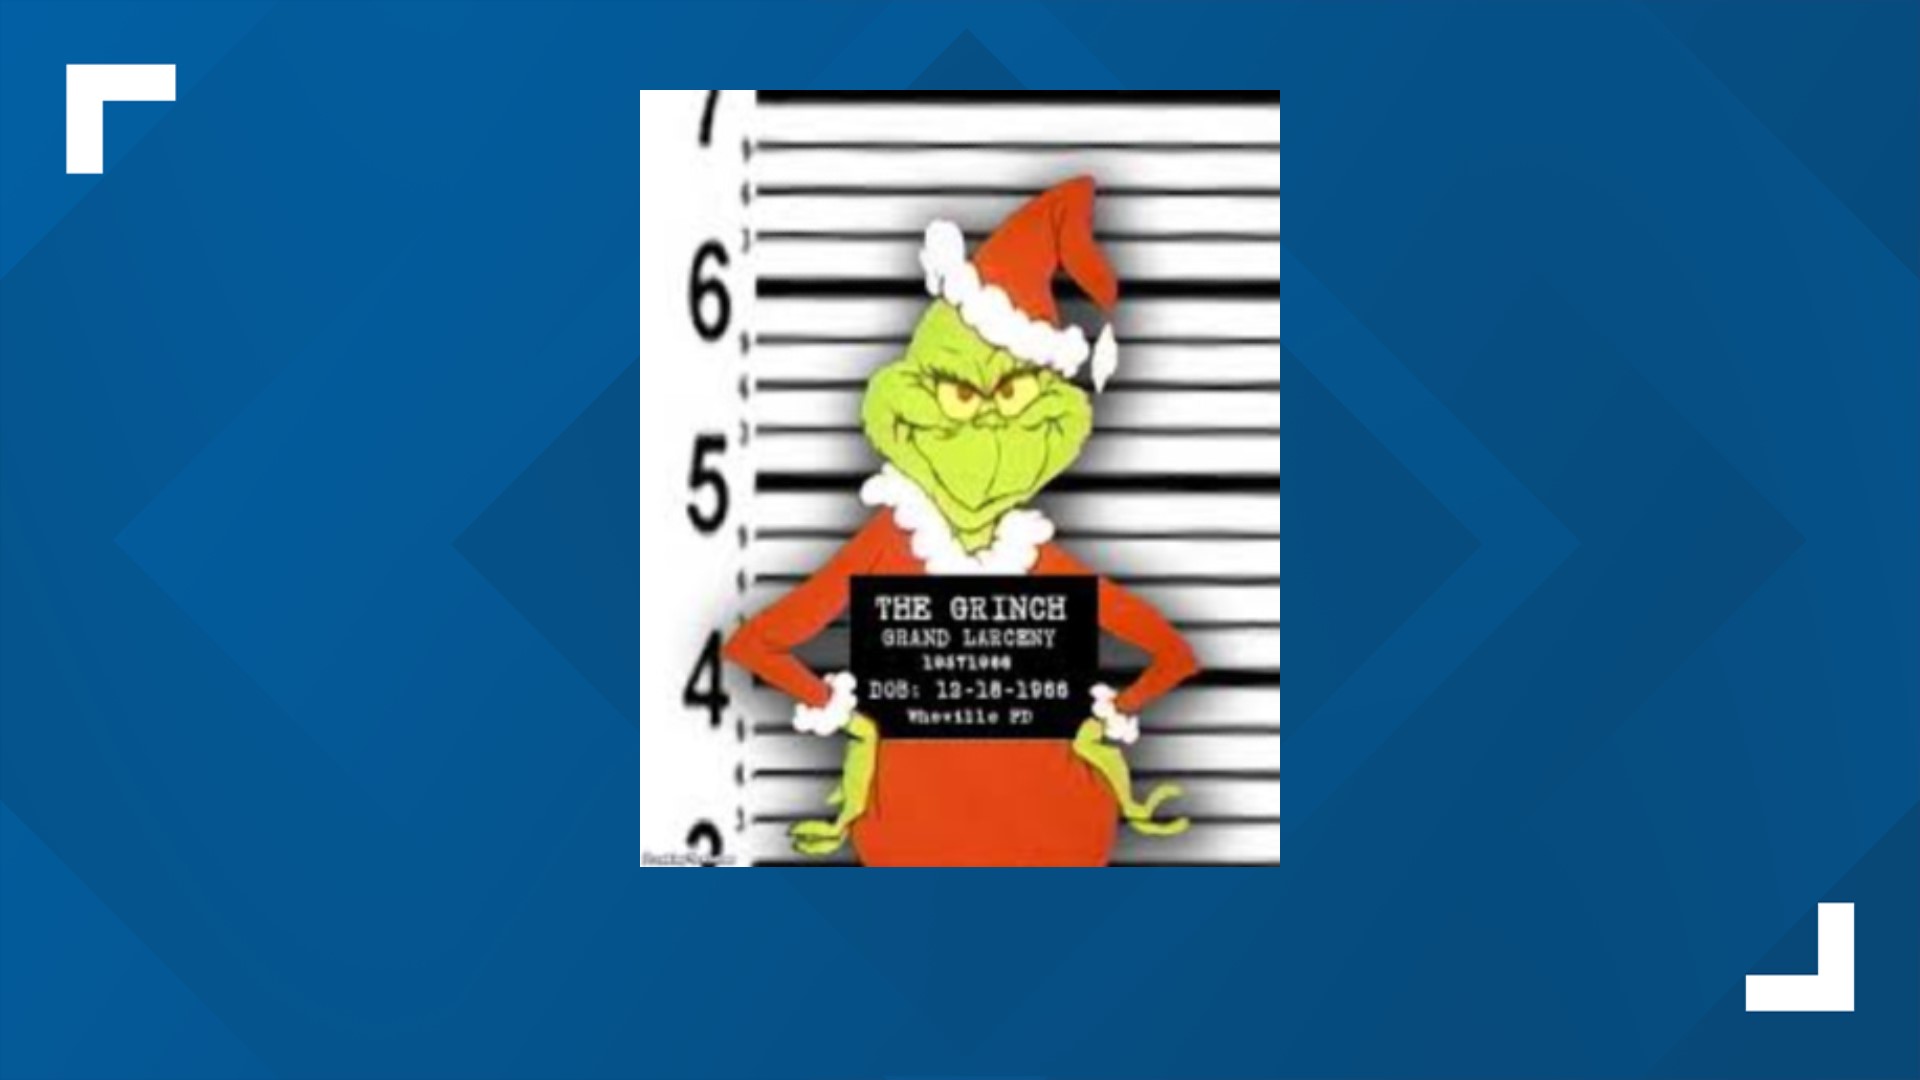 One police department in Luzerne County says the suspect from just north of Whoville, responsible for hundreds of Christmas-related thefts, is now in custody.